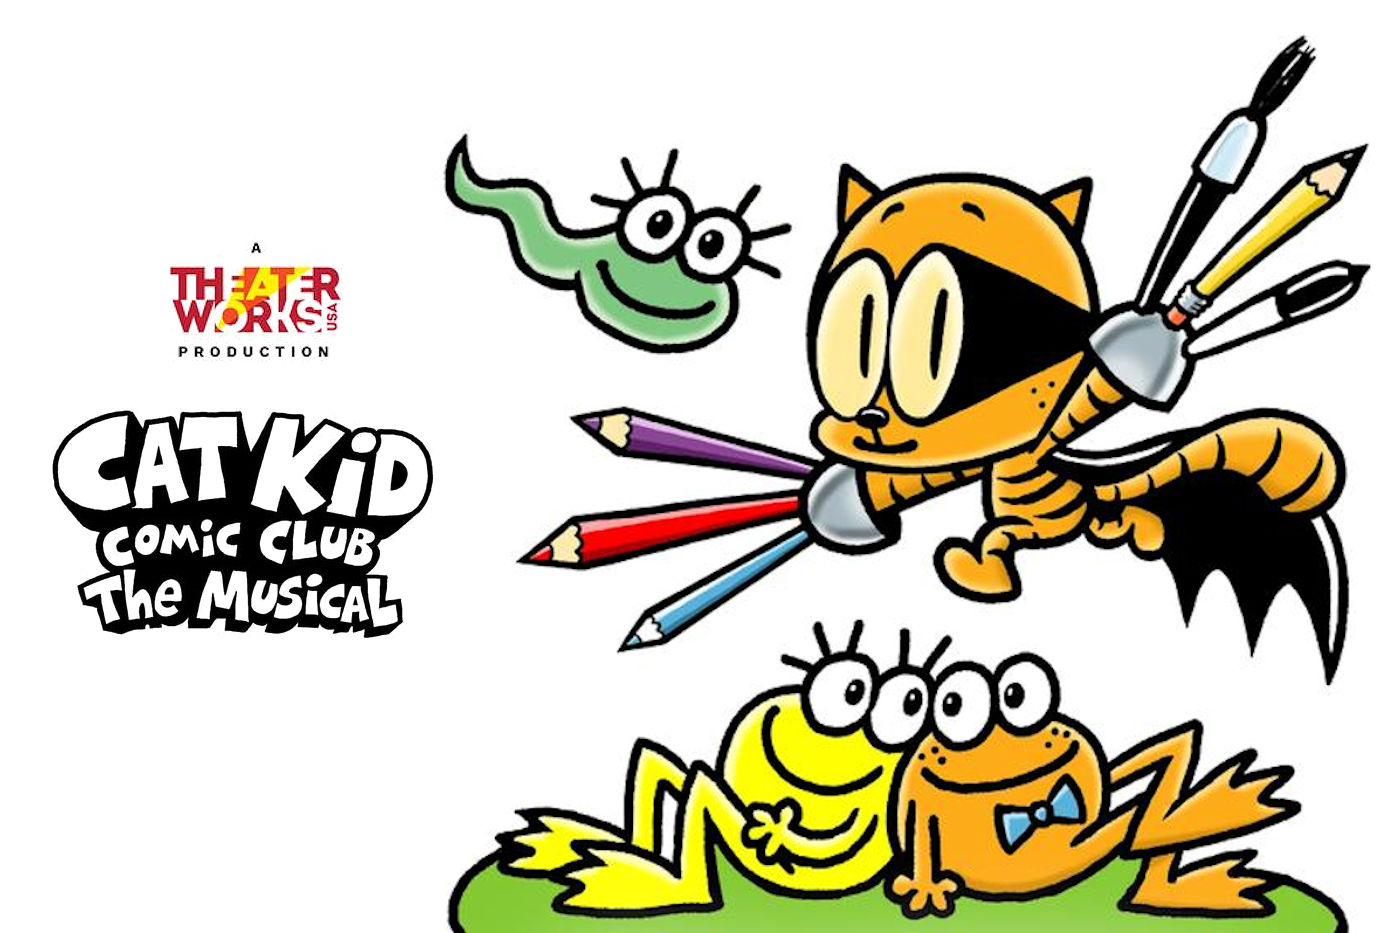 Cat Kid Comic Club The Musical at the Historic Holmes